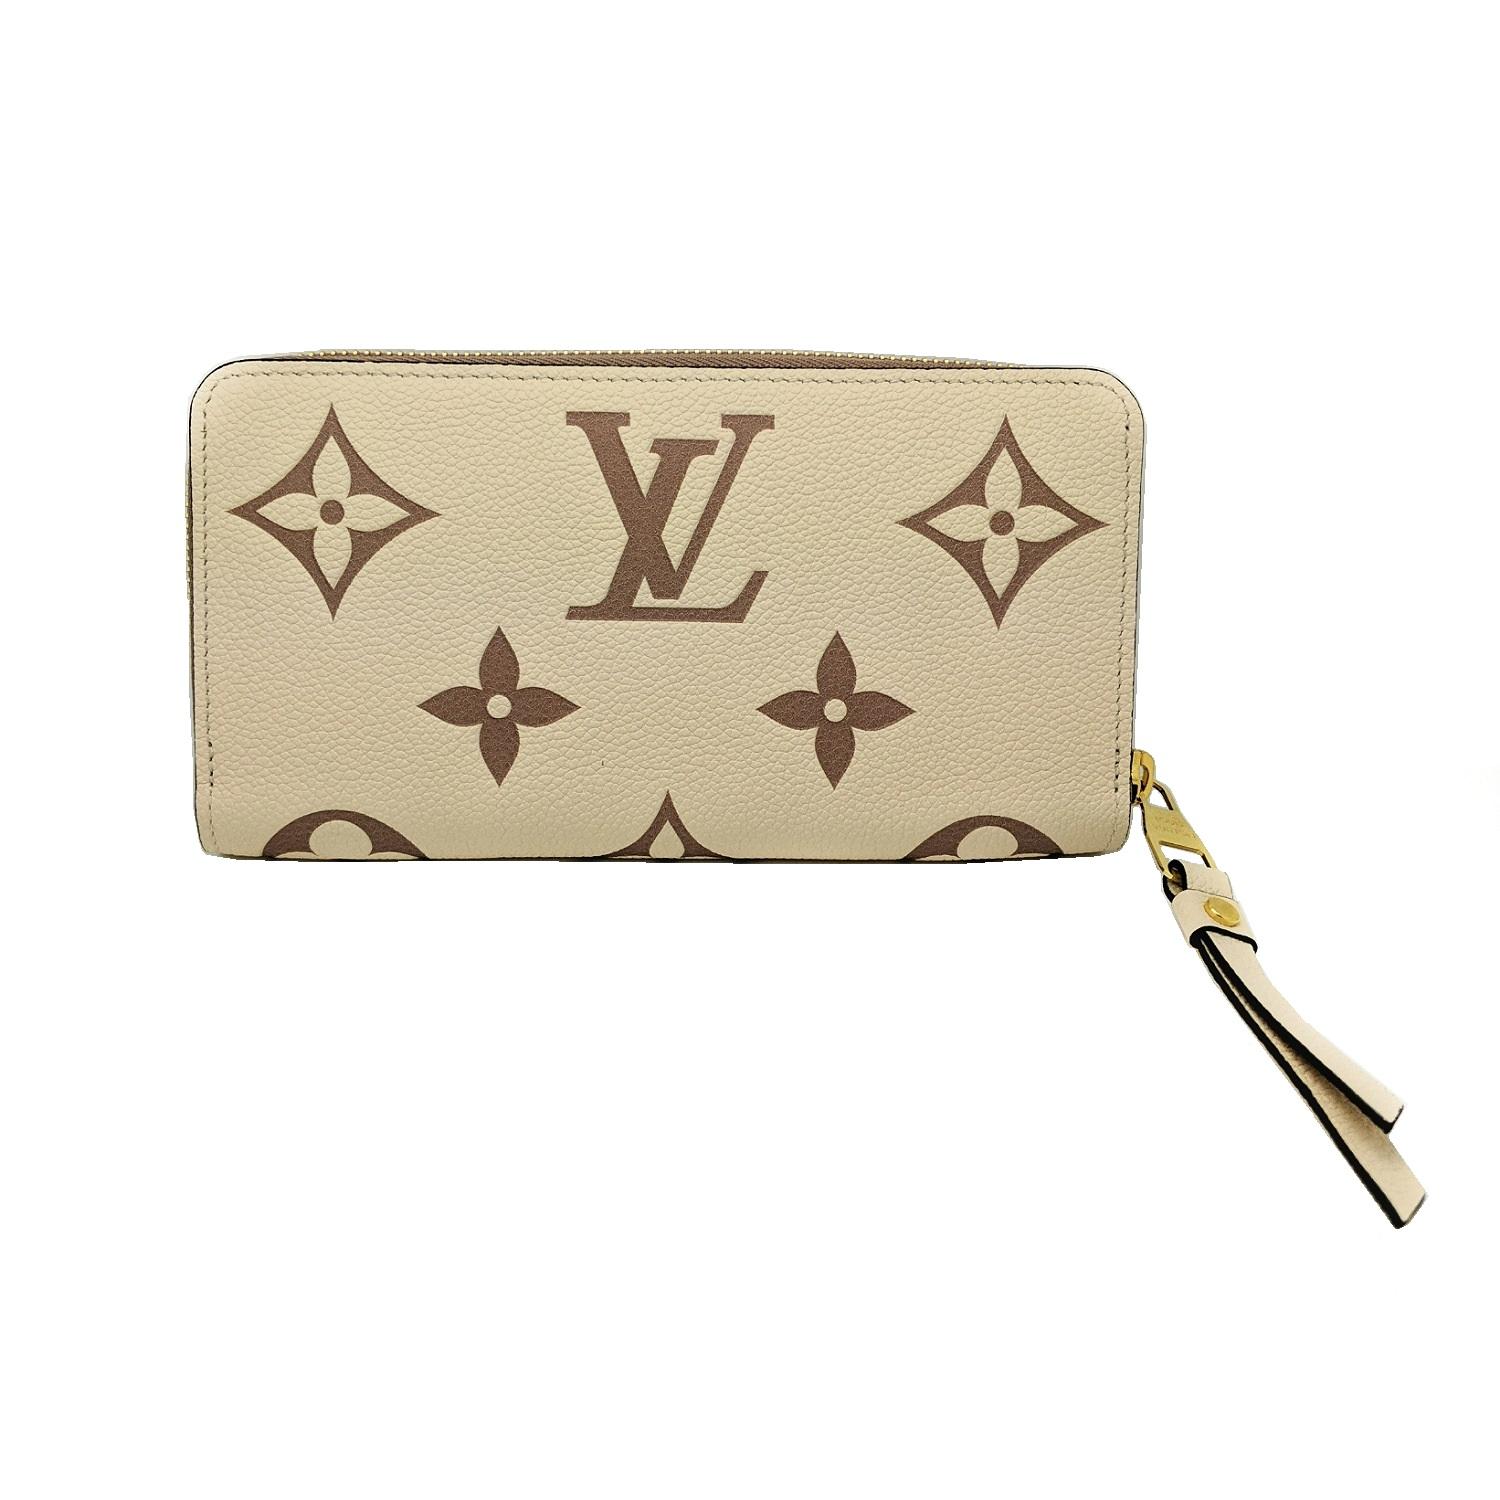 The Zippy Wallet is made from two-tone Monogram Empreinte leather, with the Monogram pattern both embossed and printed on the cowhide leather. The Zippy is an iconic House wallet known for its secure, zip-around closure and an array of inside